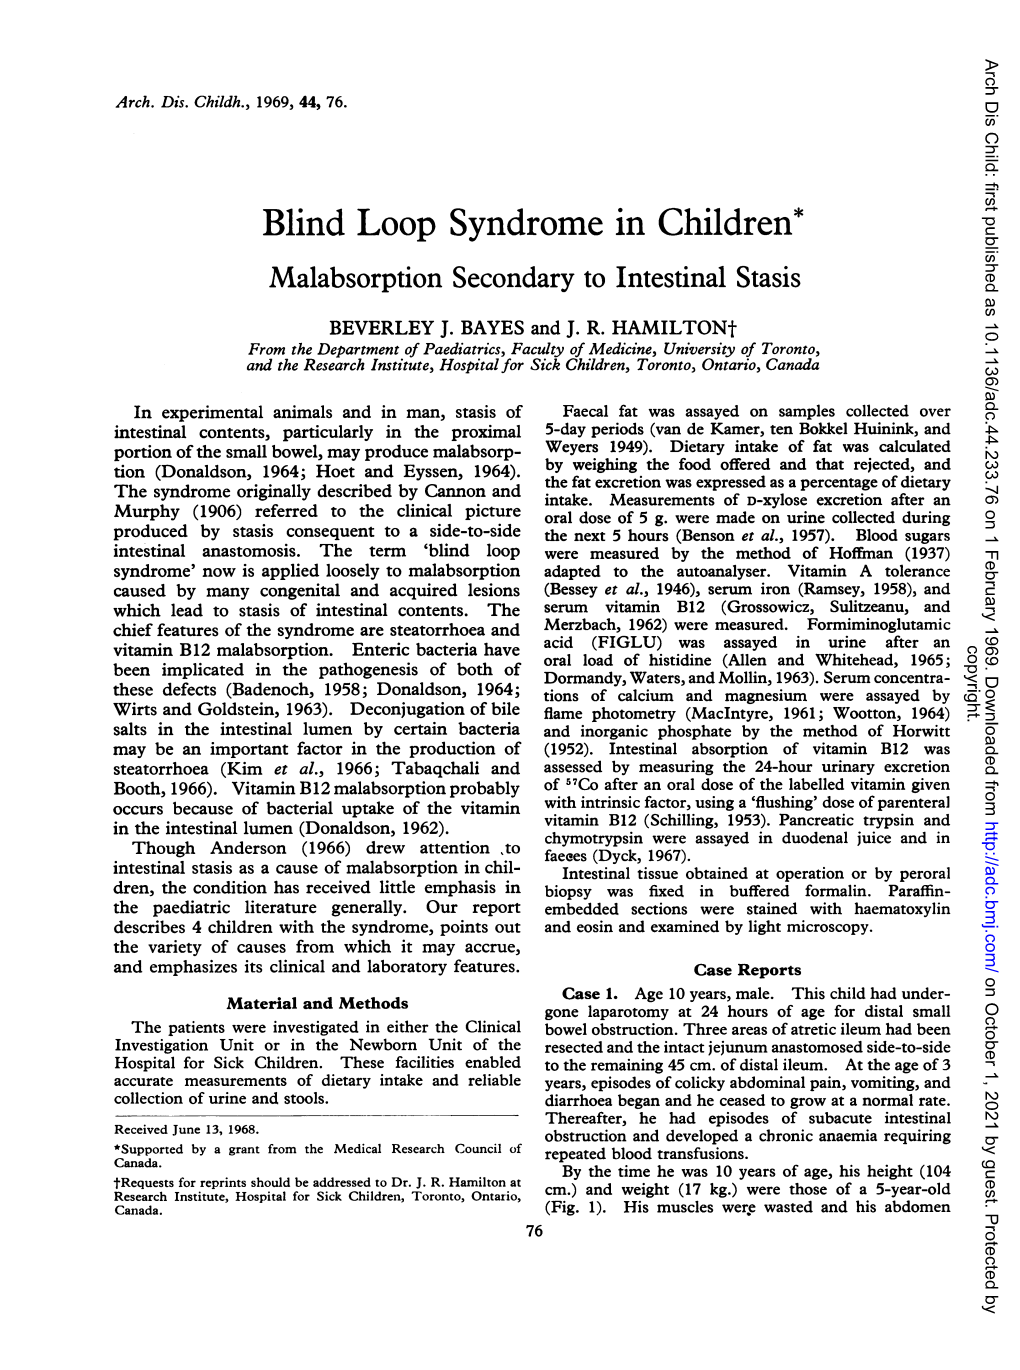 Blind Loop Syndrome in Children* Malabsorption Secondary to Intestinal Stasis BEVERLEY J